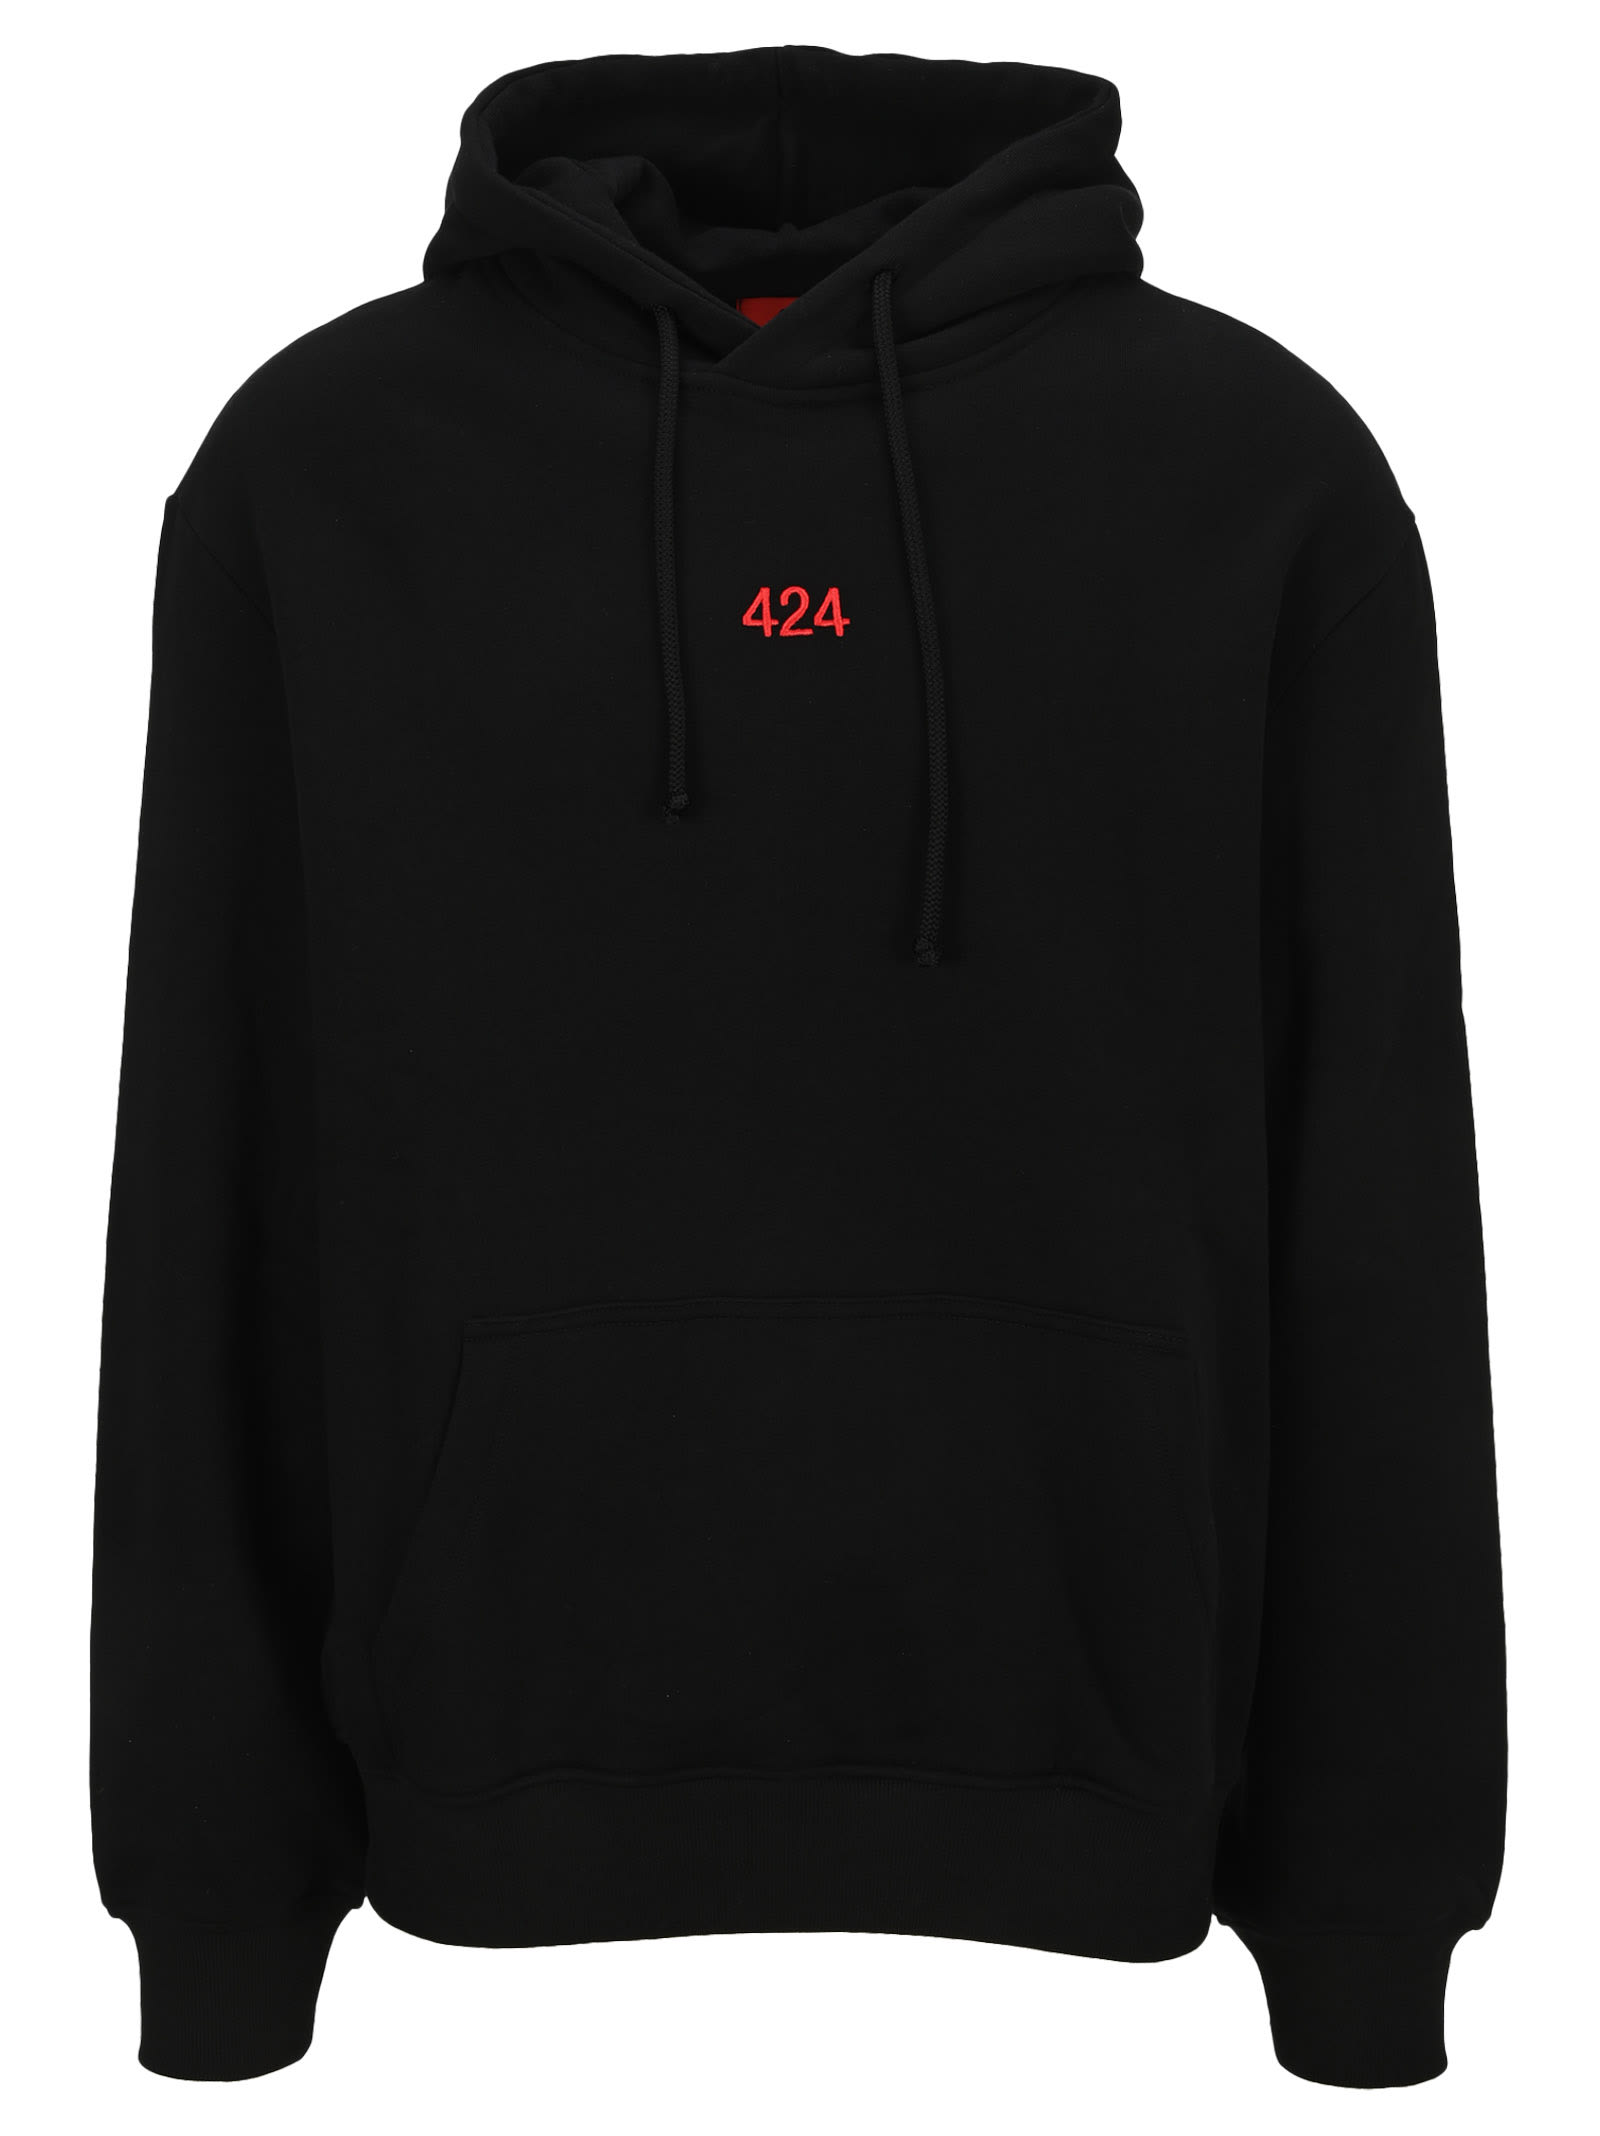 FourTwoFour on Fairfax 424 Embroidered Logo Hoodie